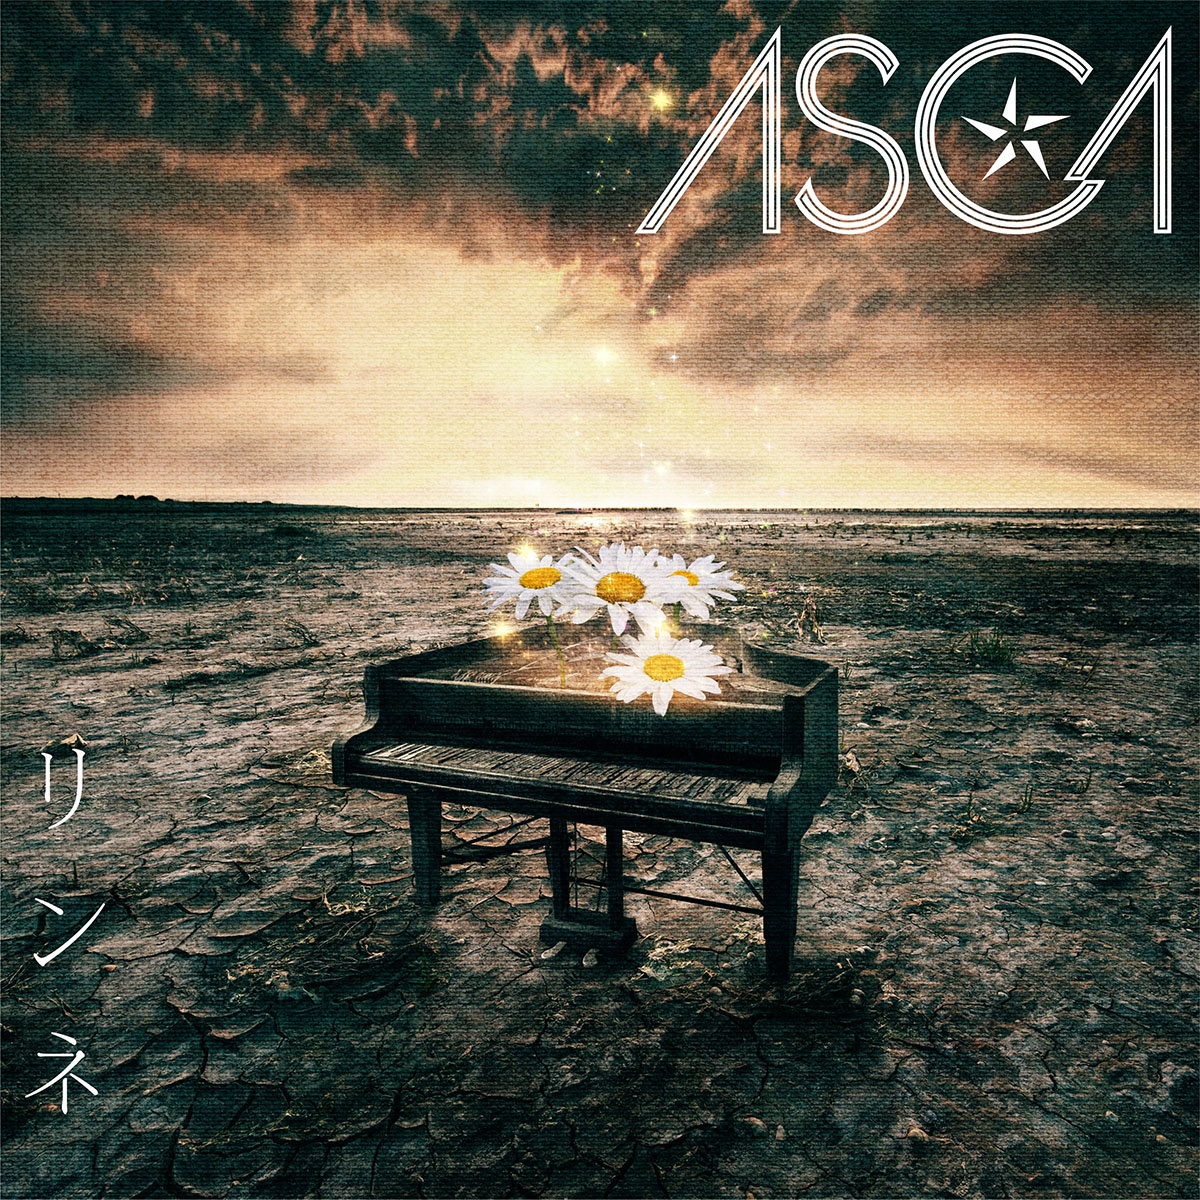 Cover art for『ASCA - リンネ』from the release『Rinne